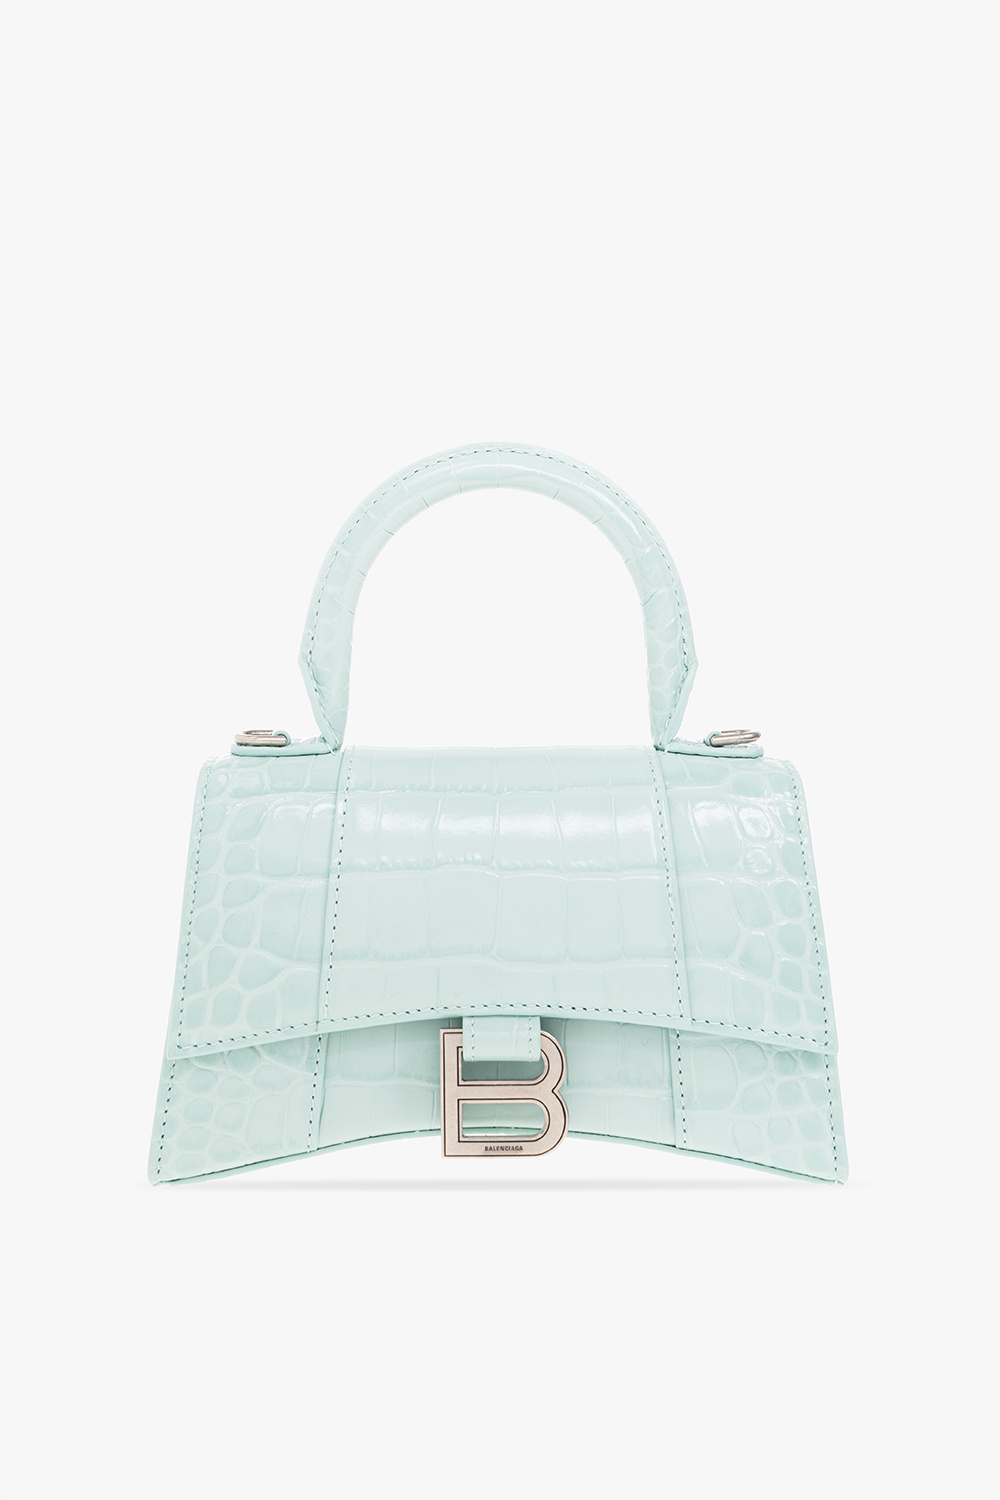 Balenciaga Baby Blue Velo Bag  Labellov  Buy and Sell Authentic Luxury